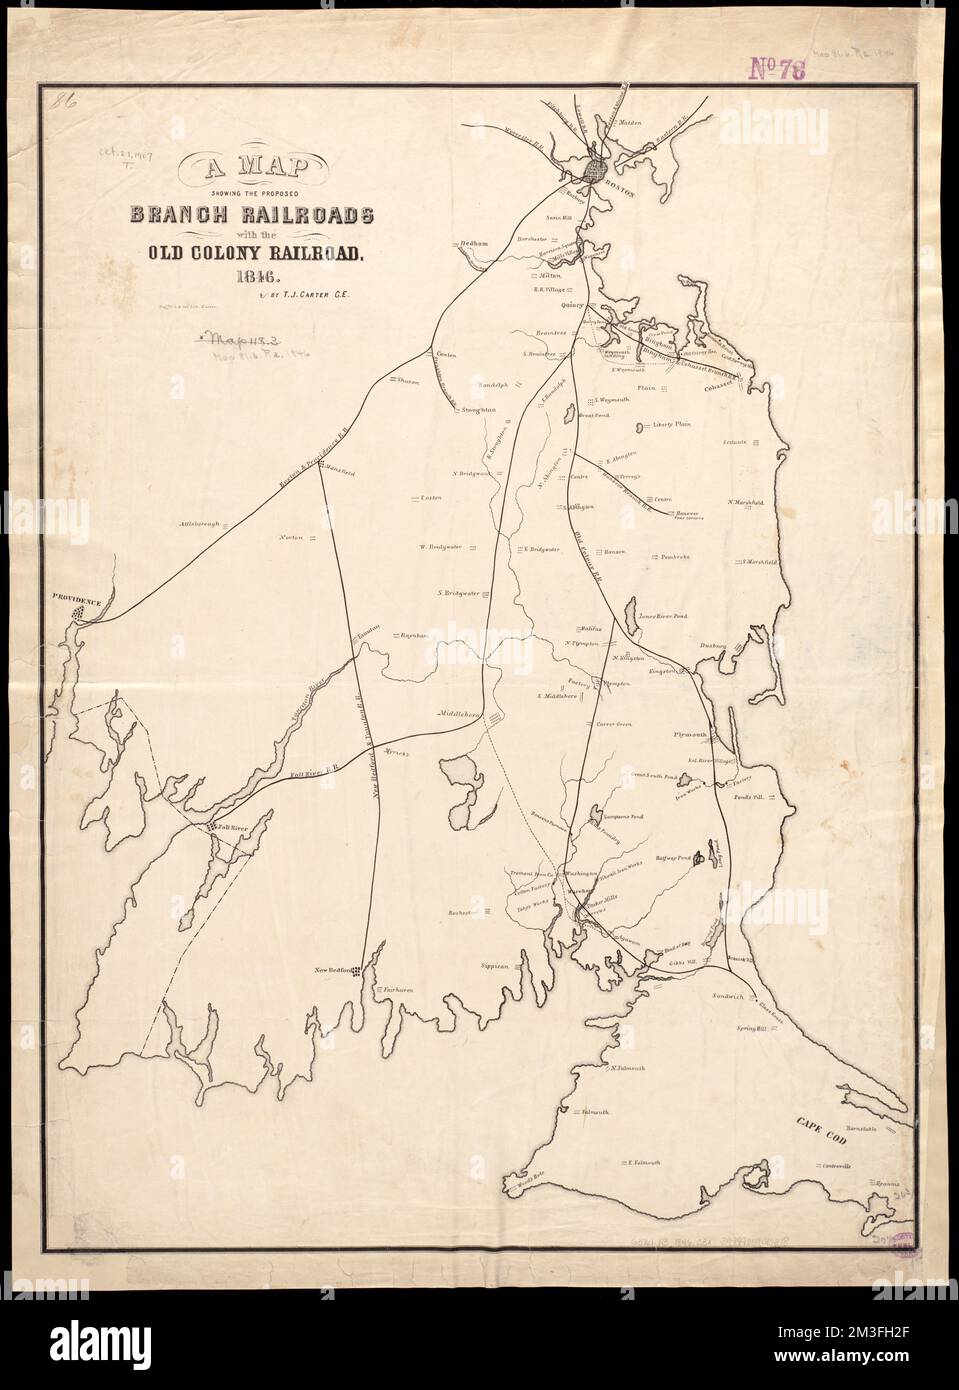 A map showing the proposed branch railroads with the Old Colony Railroad : 1846 , Old Colony Railroad Company, Maps, Railroads, Massachusetts, Maps, Massachusetts, Maps Norman B. Leventhal Map Center Collection Stock Photo